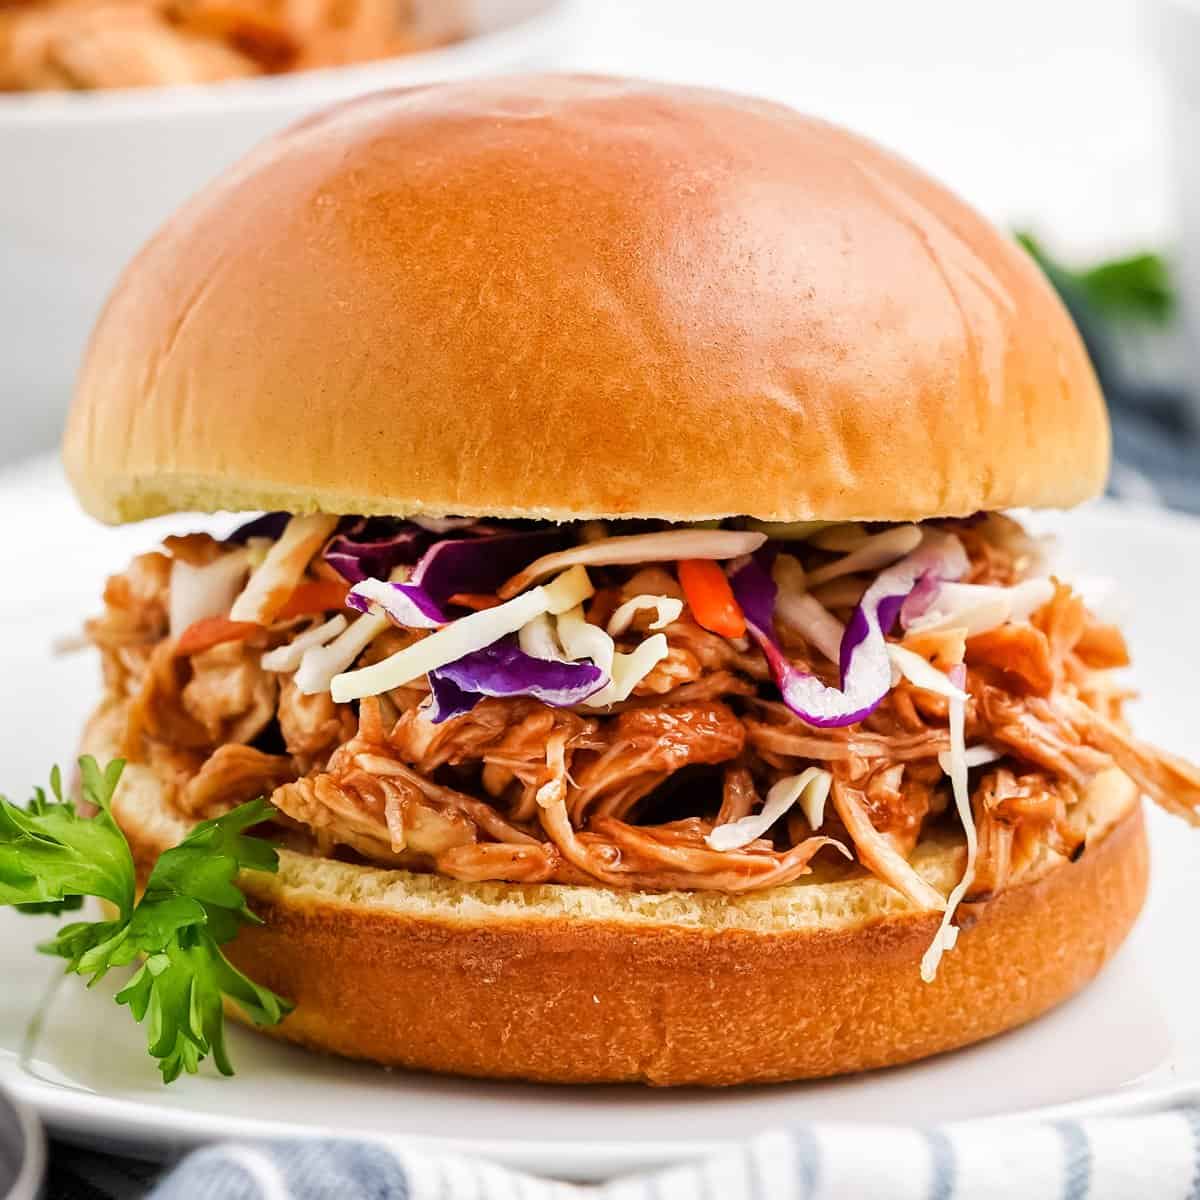 https://www.thechunkychef.com/wp-content/uploads/2022/06/Slow-Cooker-BBQ-Chicken-recipe-card.jpg